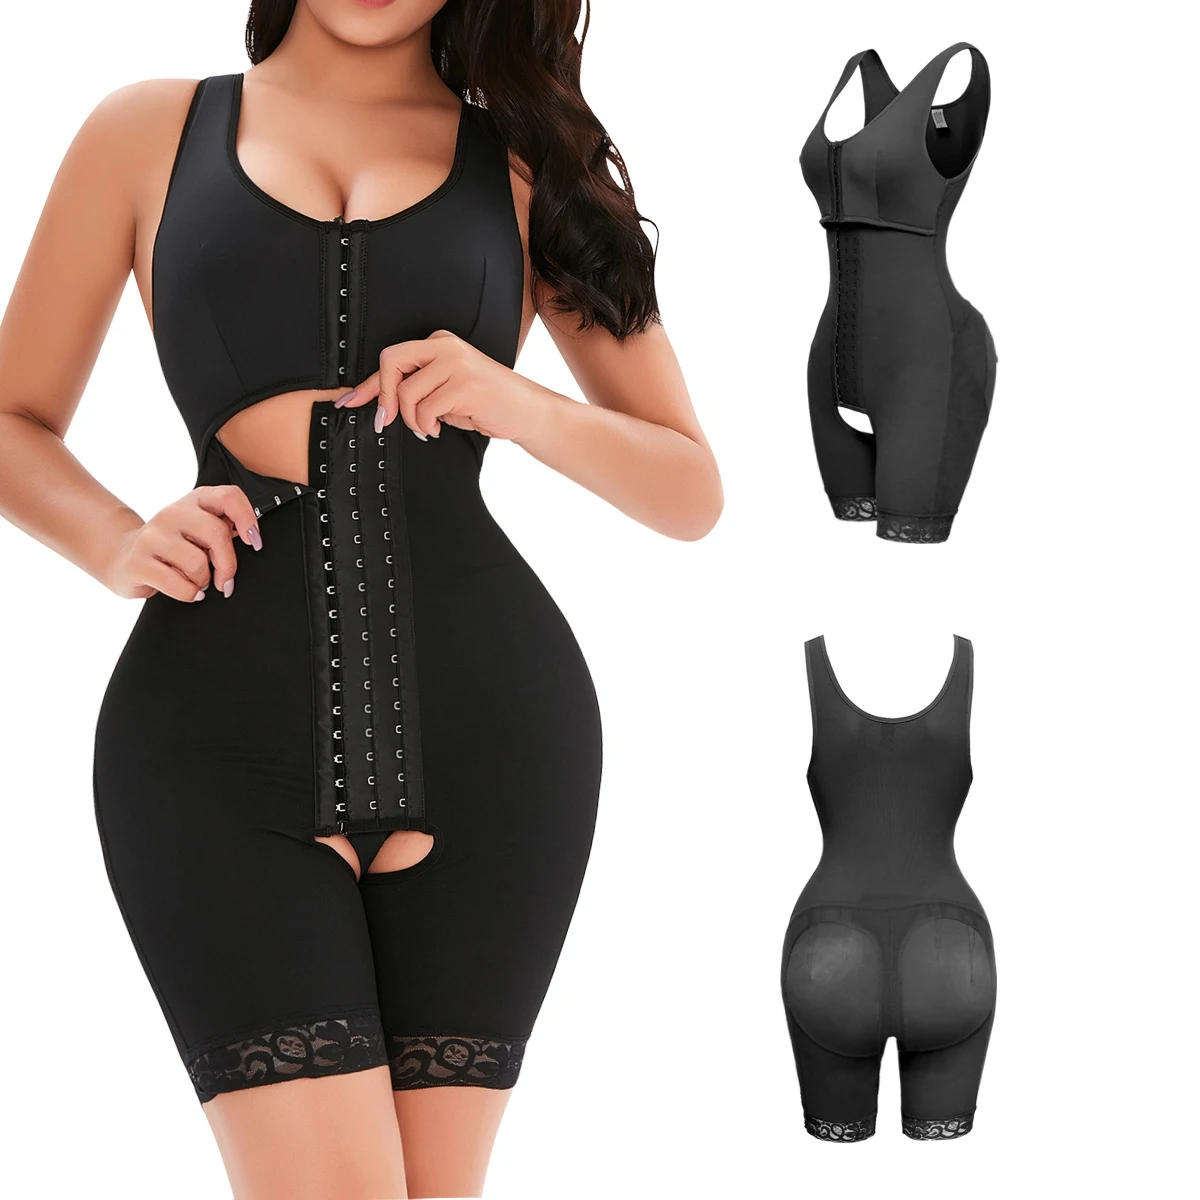 

Women's slimming fajas body shaping shaper weight loss Shapewear compression garment for liposuction, Black nude